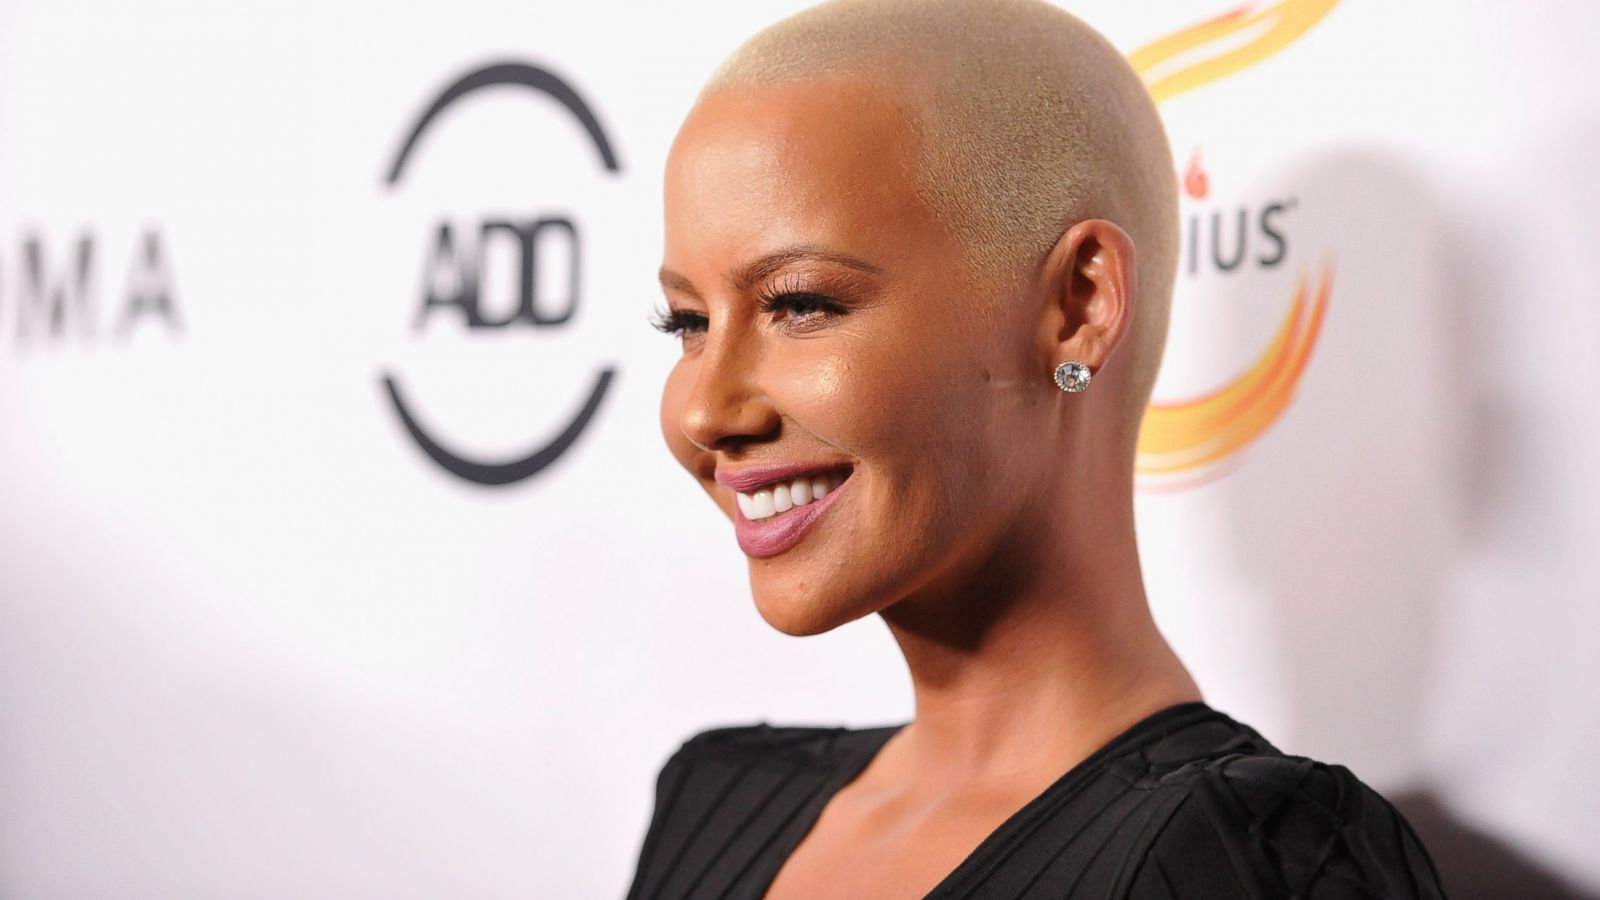 bonnie nickerson share amber rose video nude photos